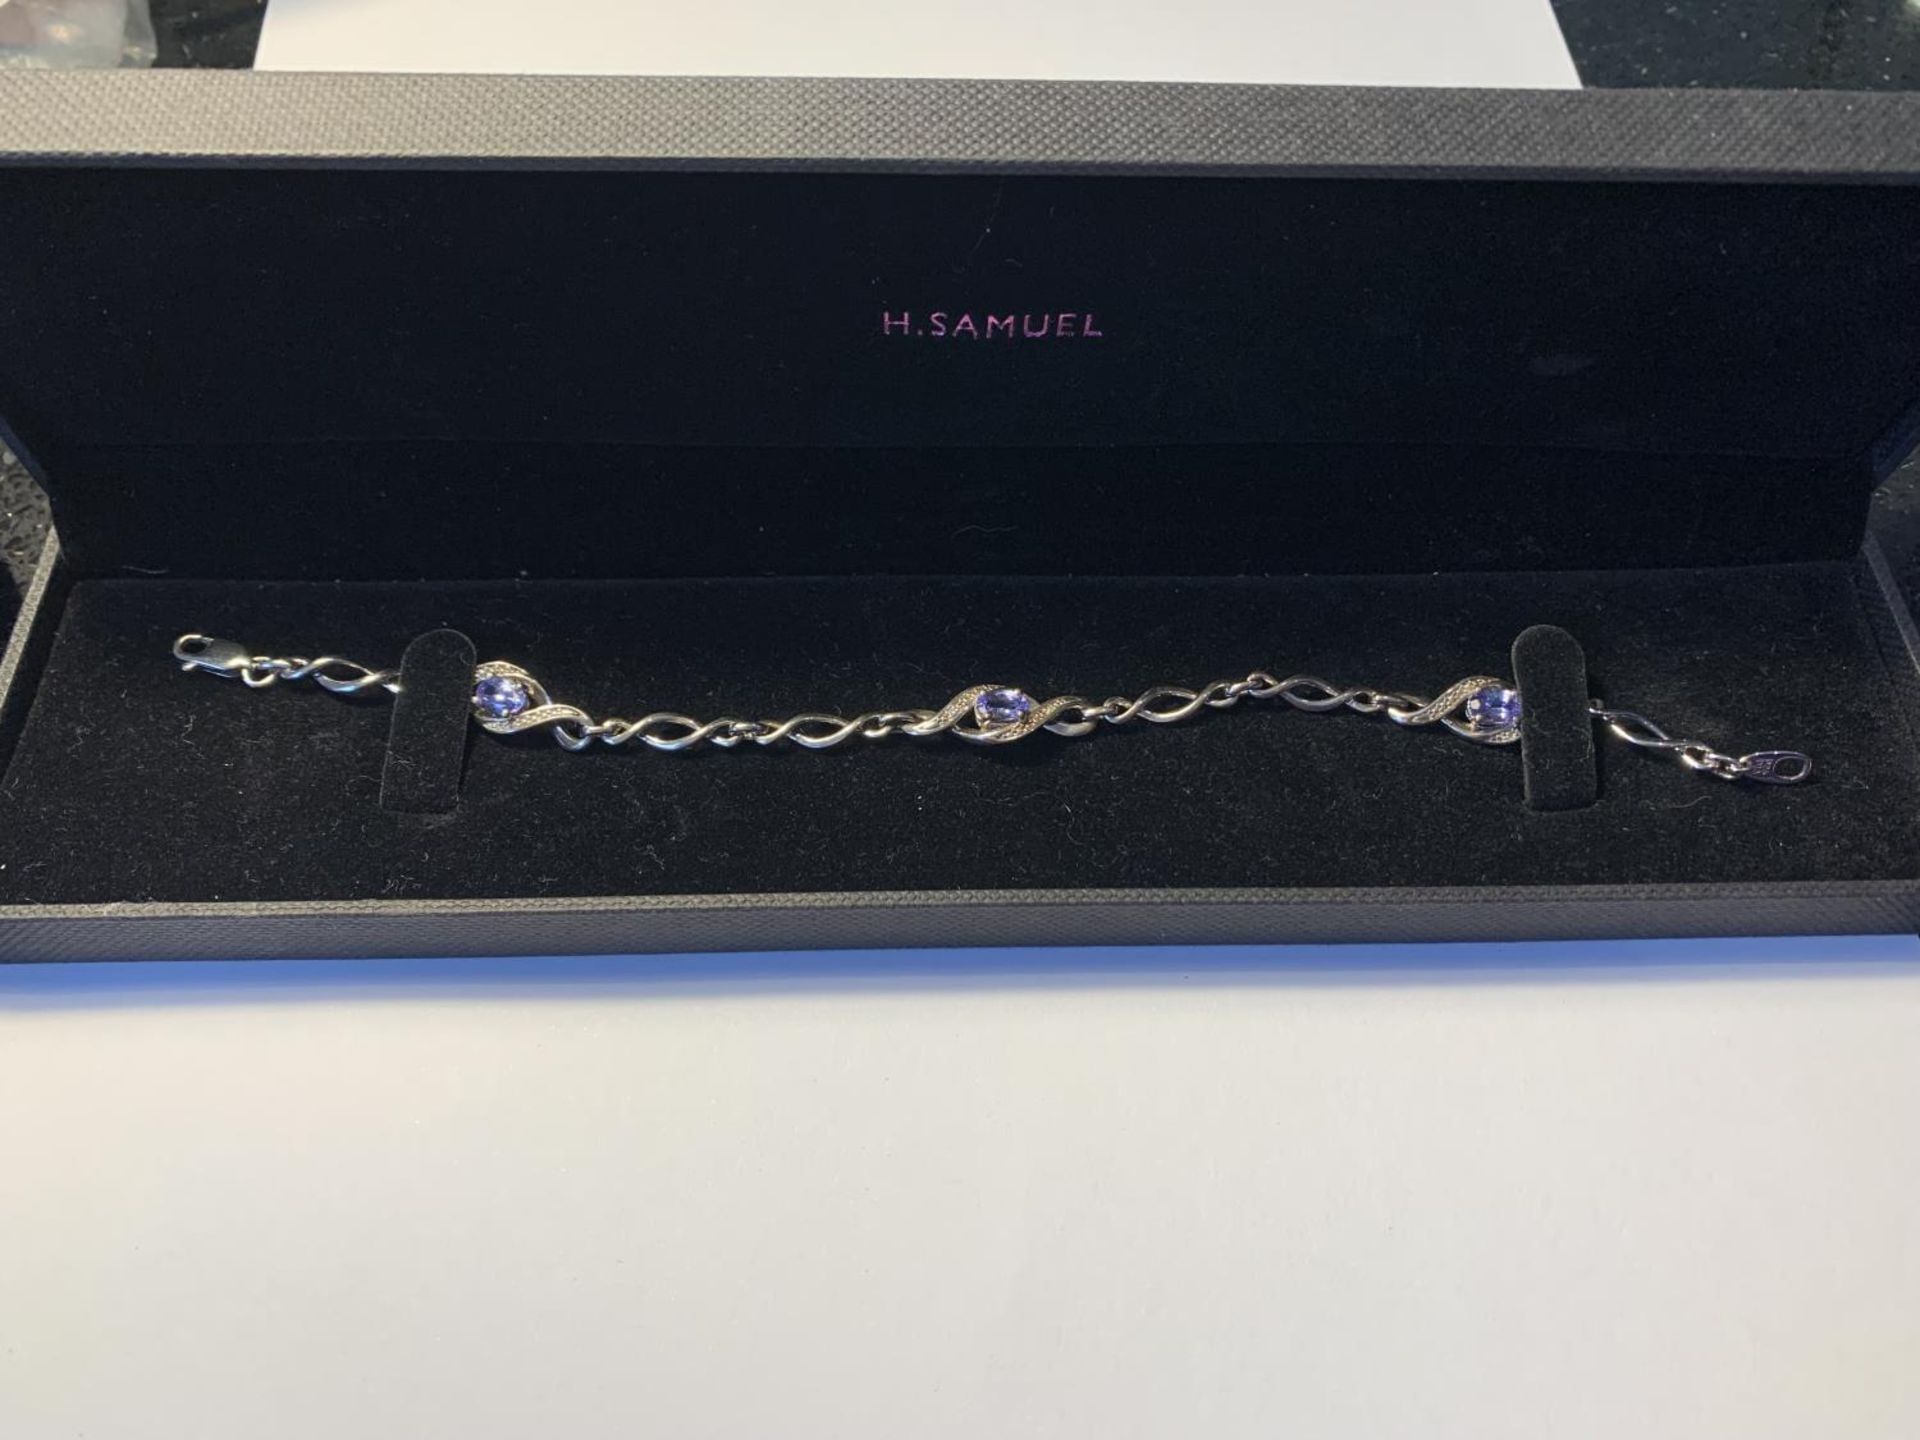 A SILVER BRACELET WITH POSSIBLY AQUAMARINES AND DIAMOND CHIPS IN A PRESENTATION BOX - Image 4 of 4